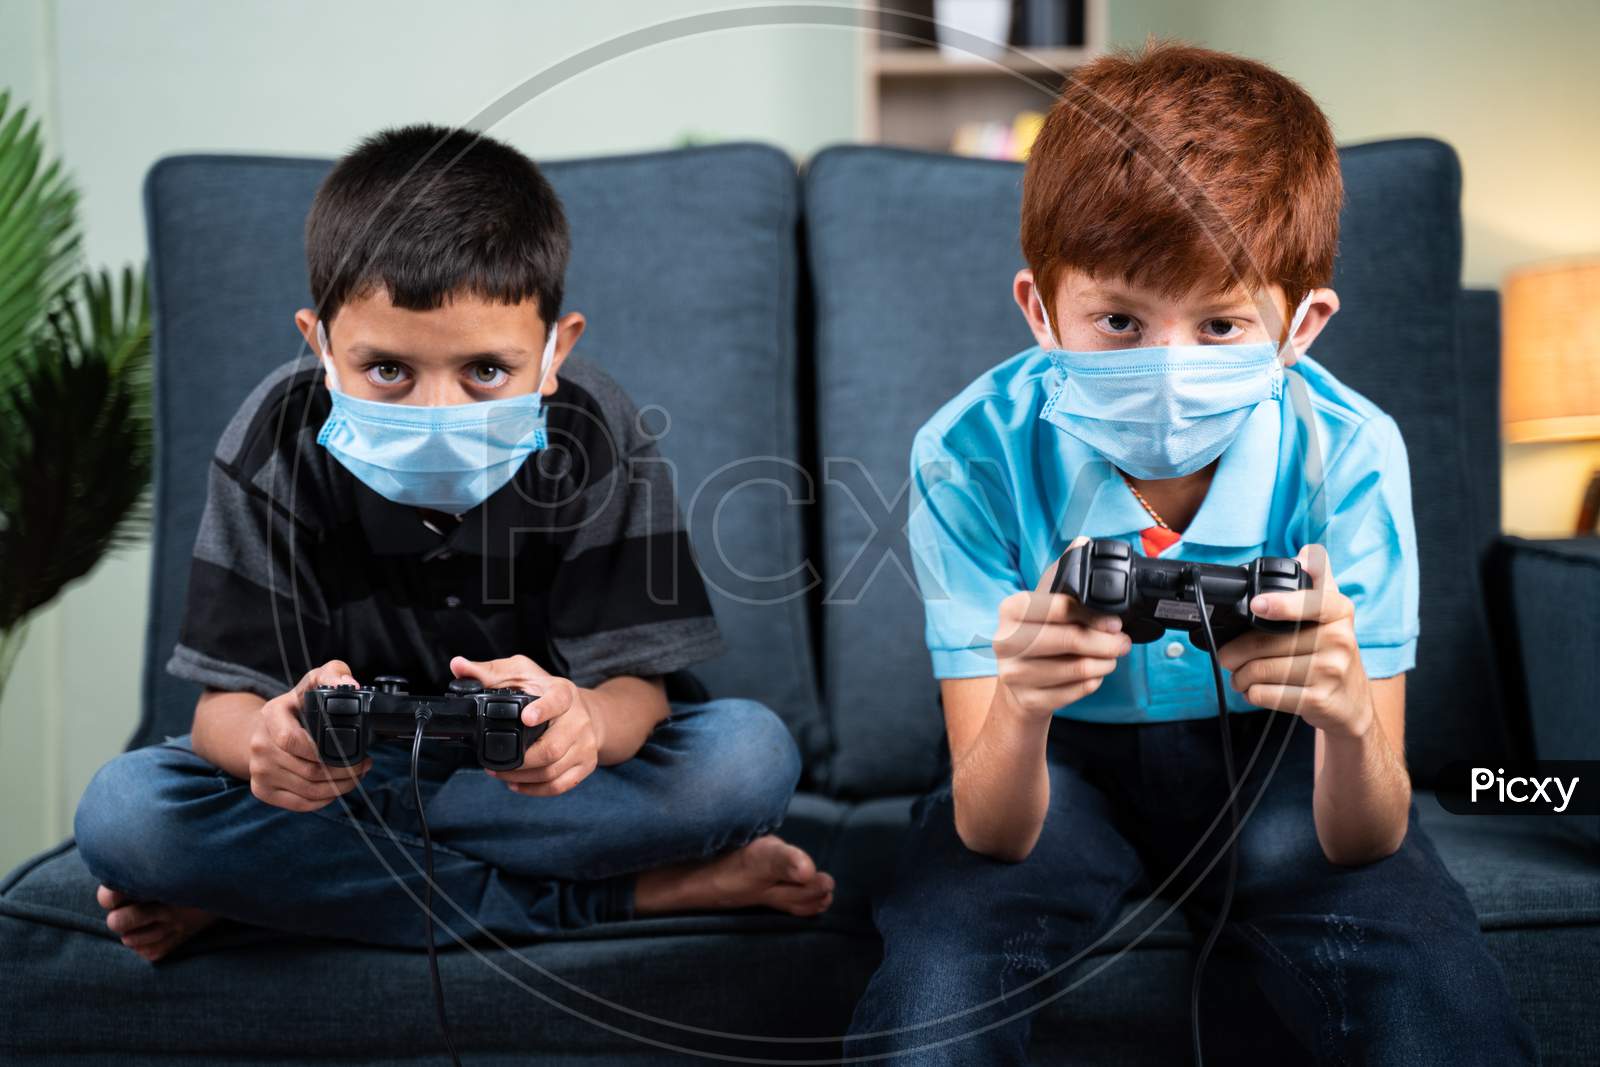 Two Kids With Medical Face Mask Seriously Busy Playing Video Game Using Joystick At Home - Concept Of Kids On Game During Coronavirus Covid-19 Lockdown.